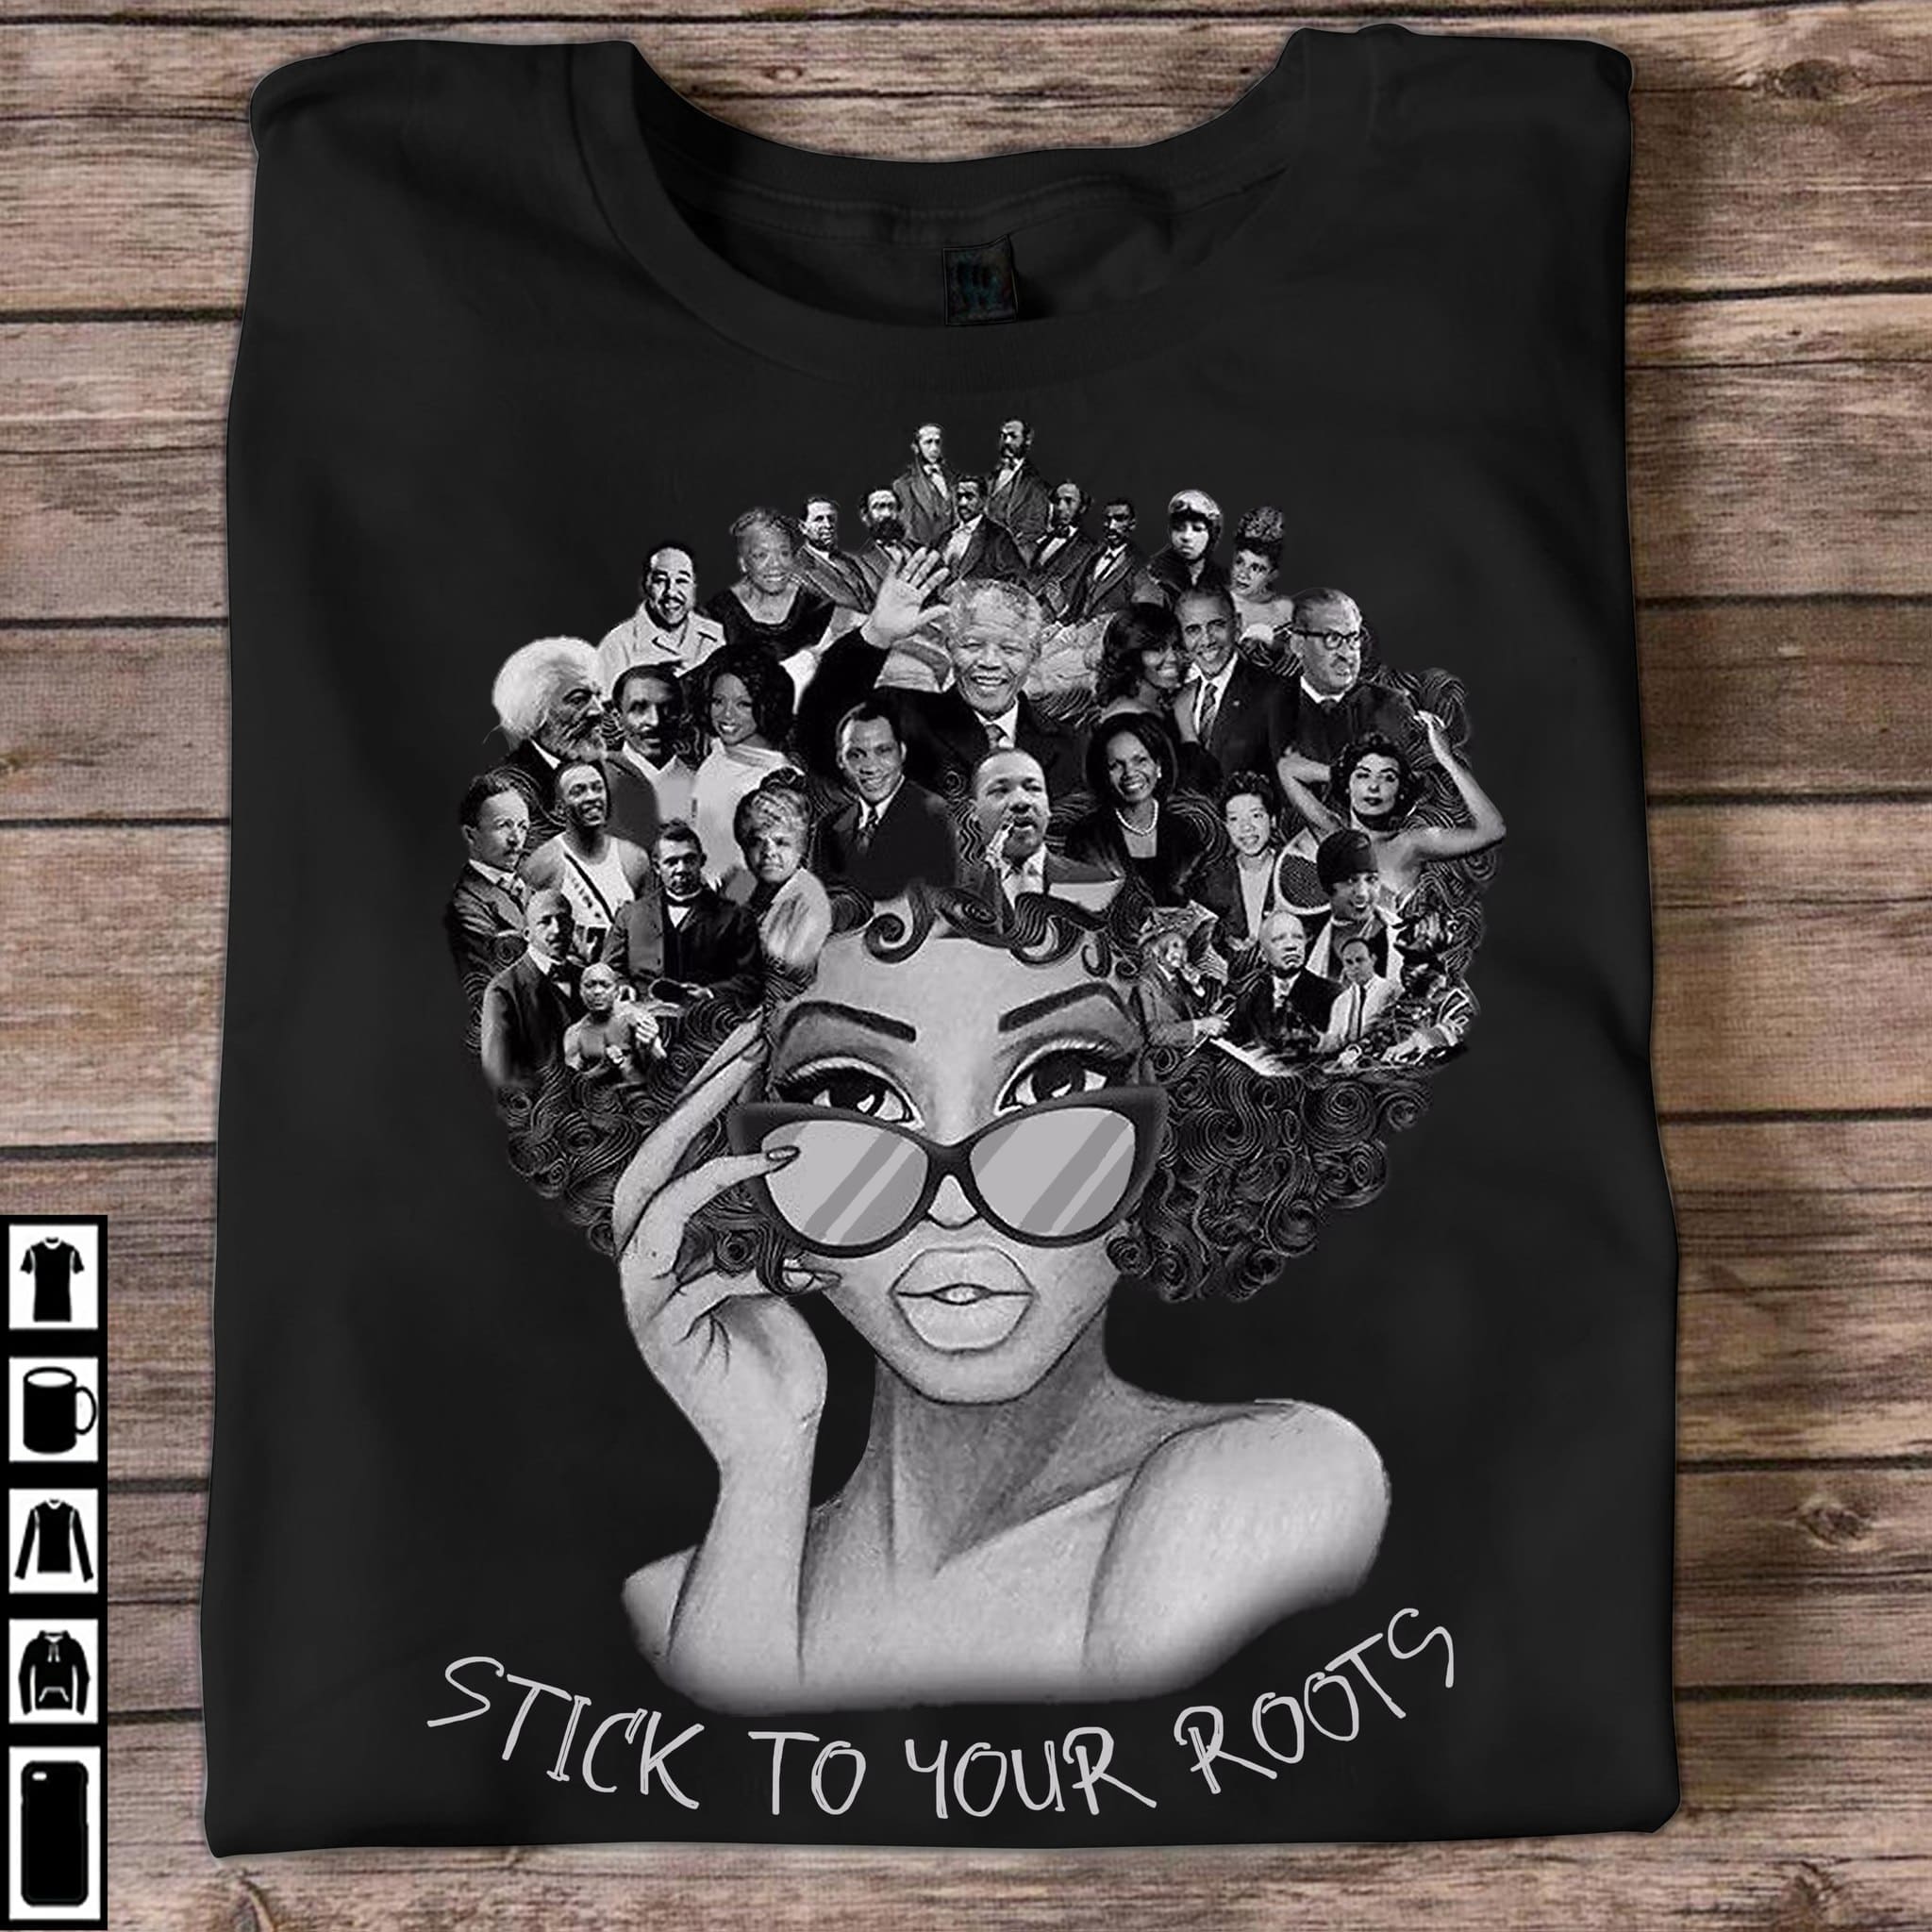 Stick to your roots - Gift for black community, beautiful black girl